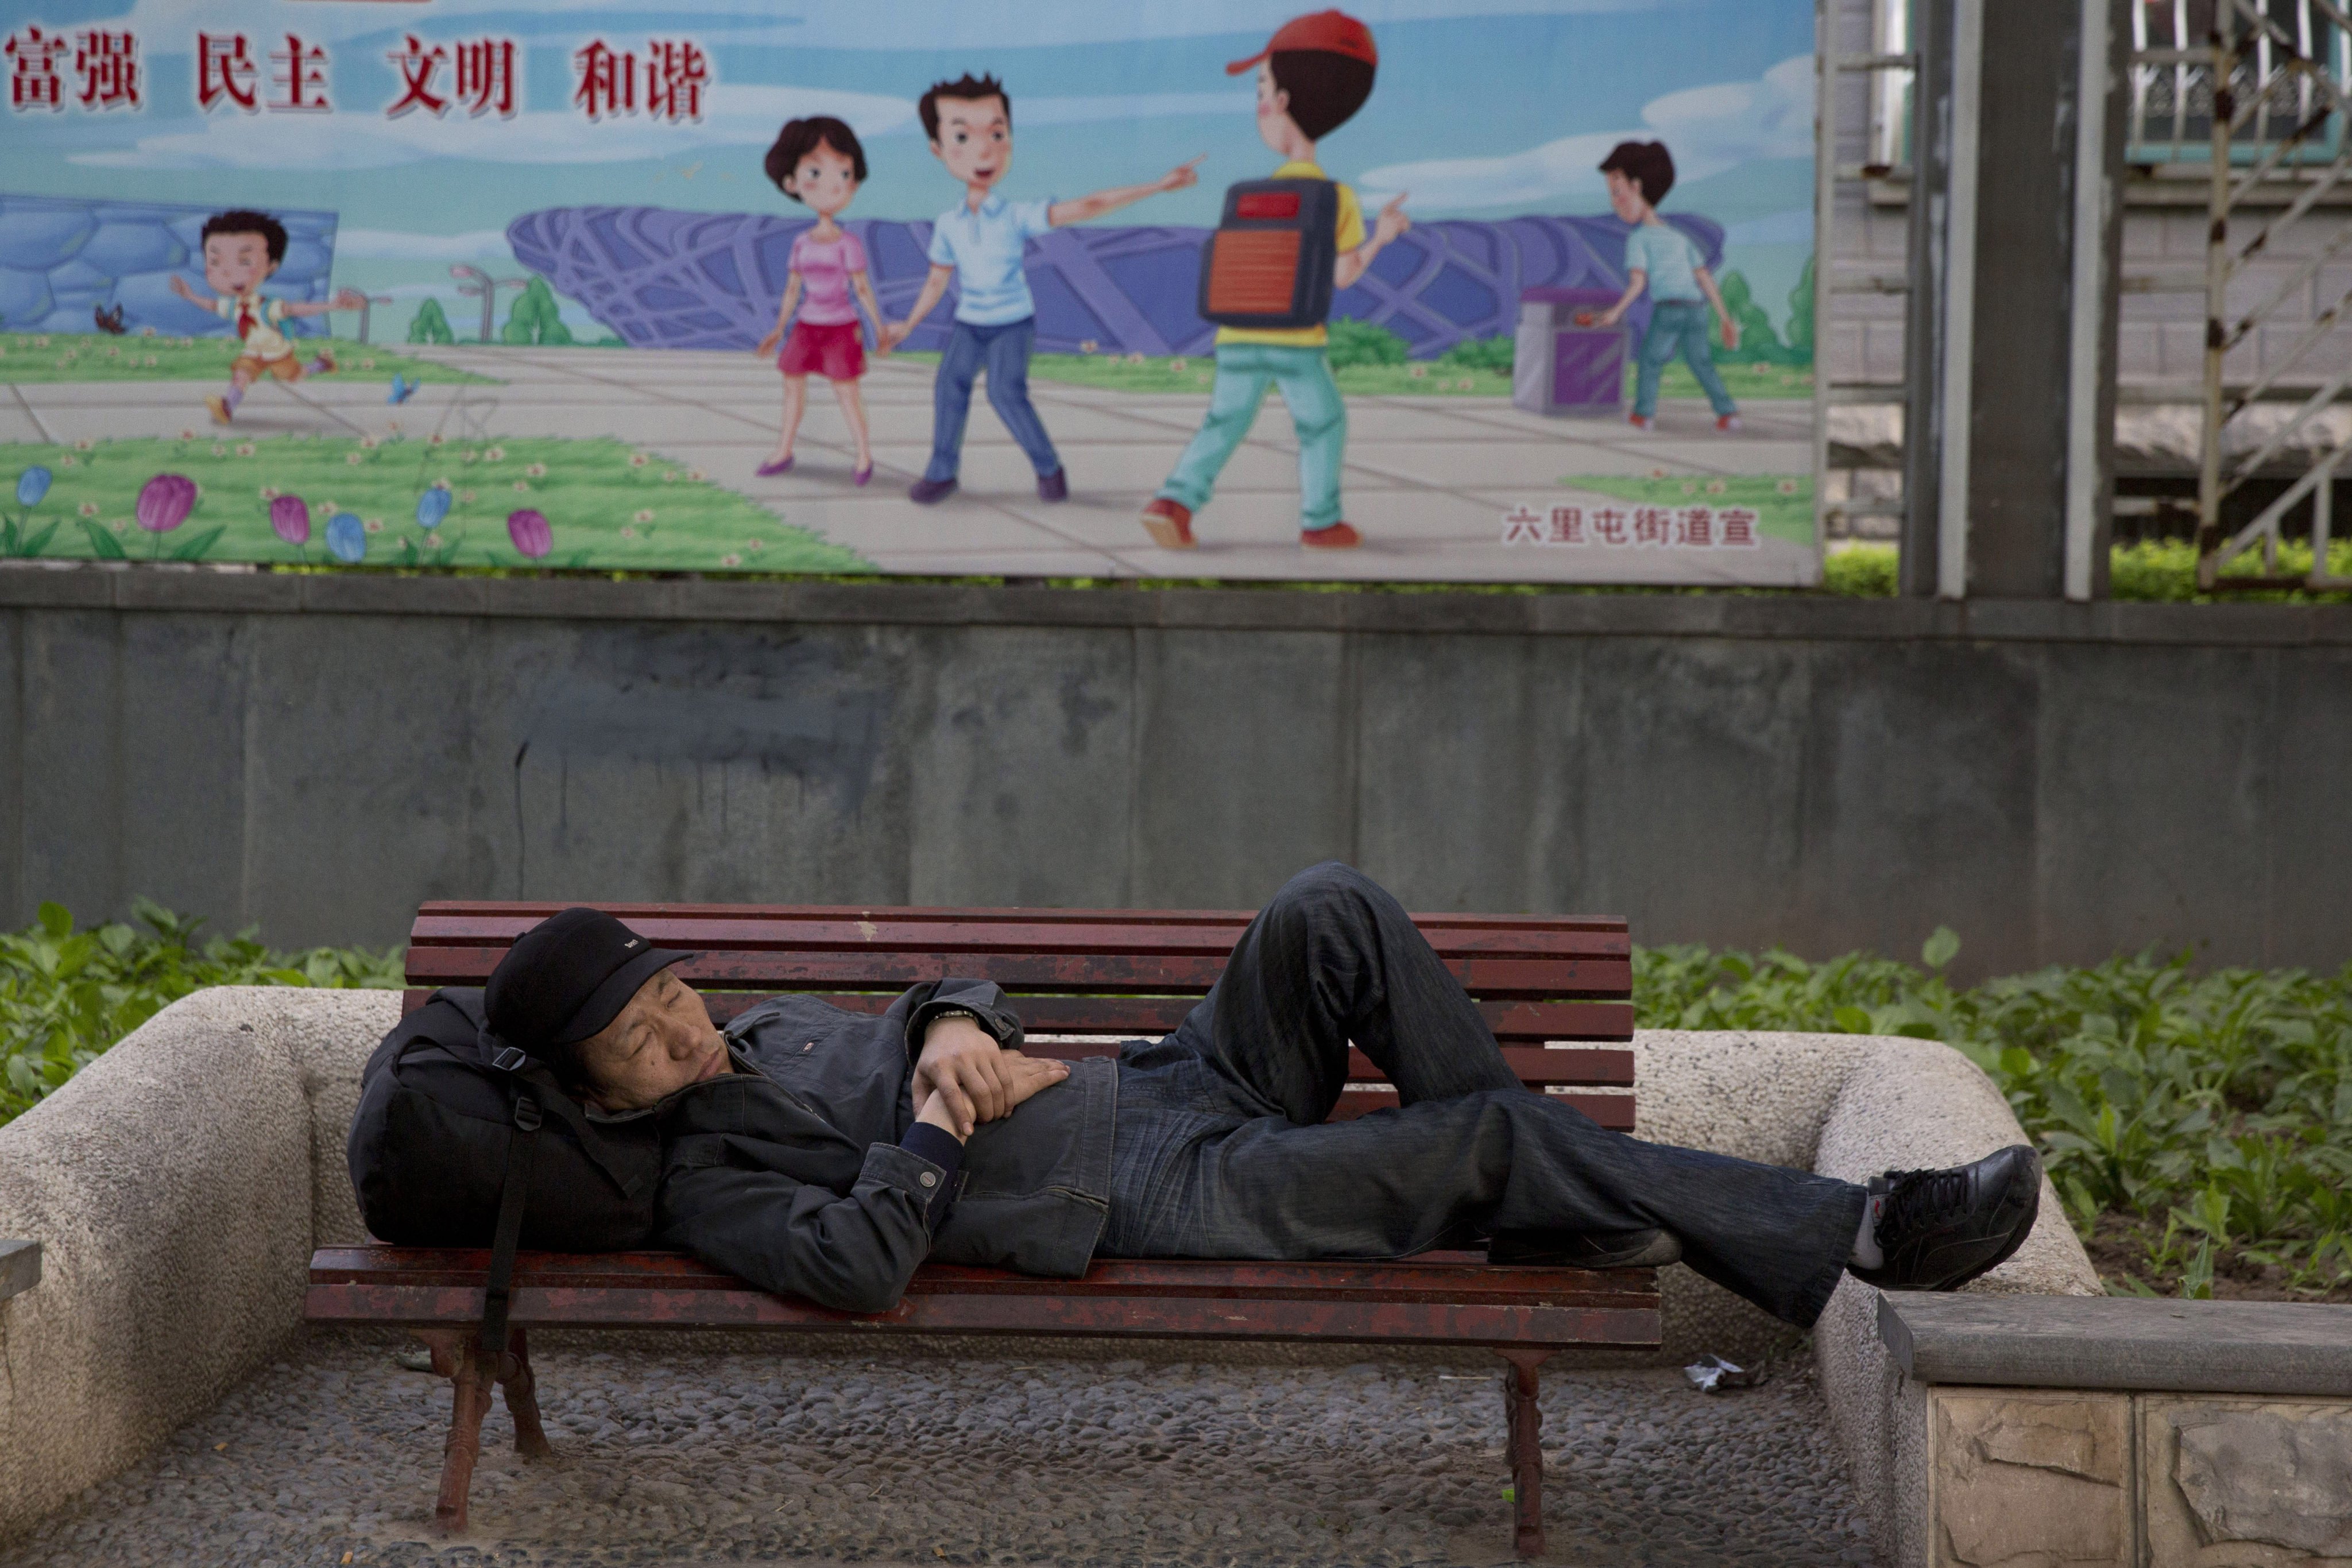 A man sleeps on a bench near a government billboard touting “prosperity, democracy, civilisation and harmony” on a street in Beijing on May 5, 2015. Photo: AP